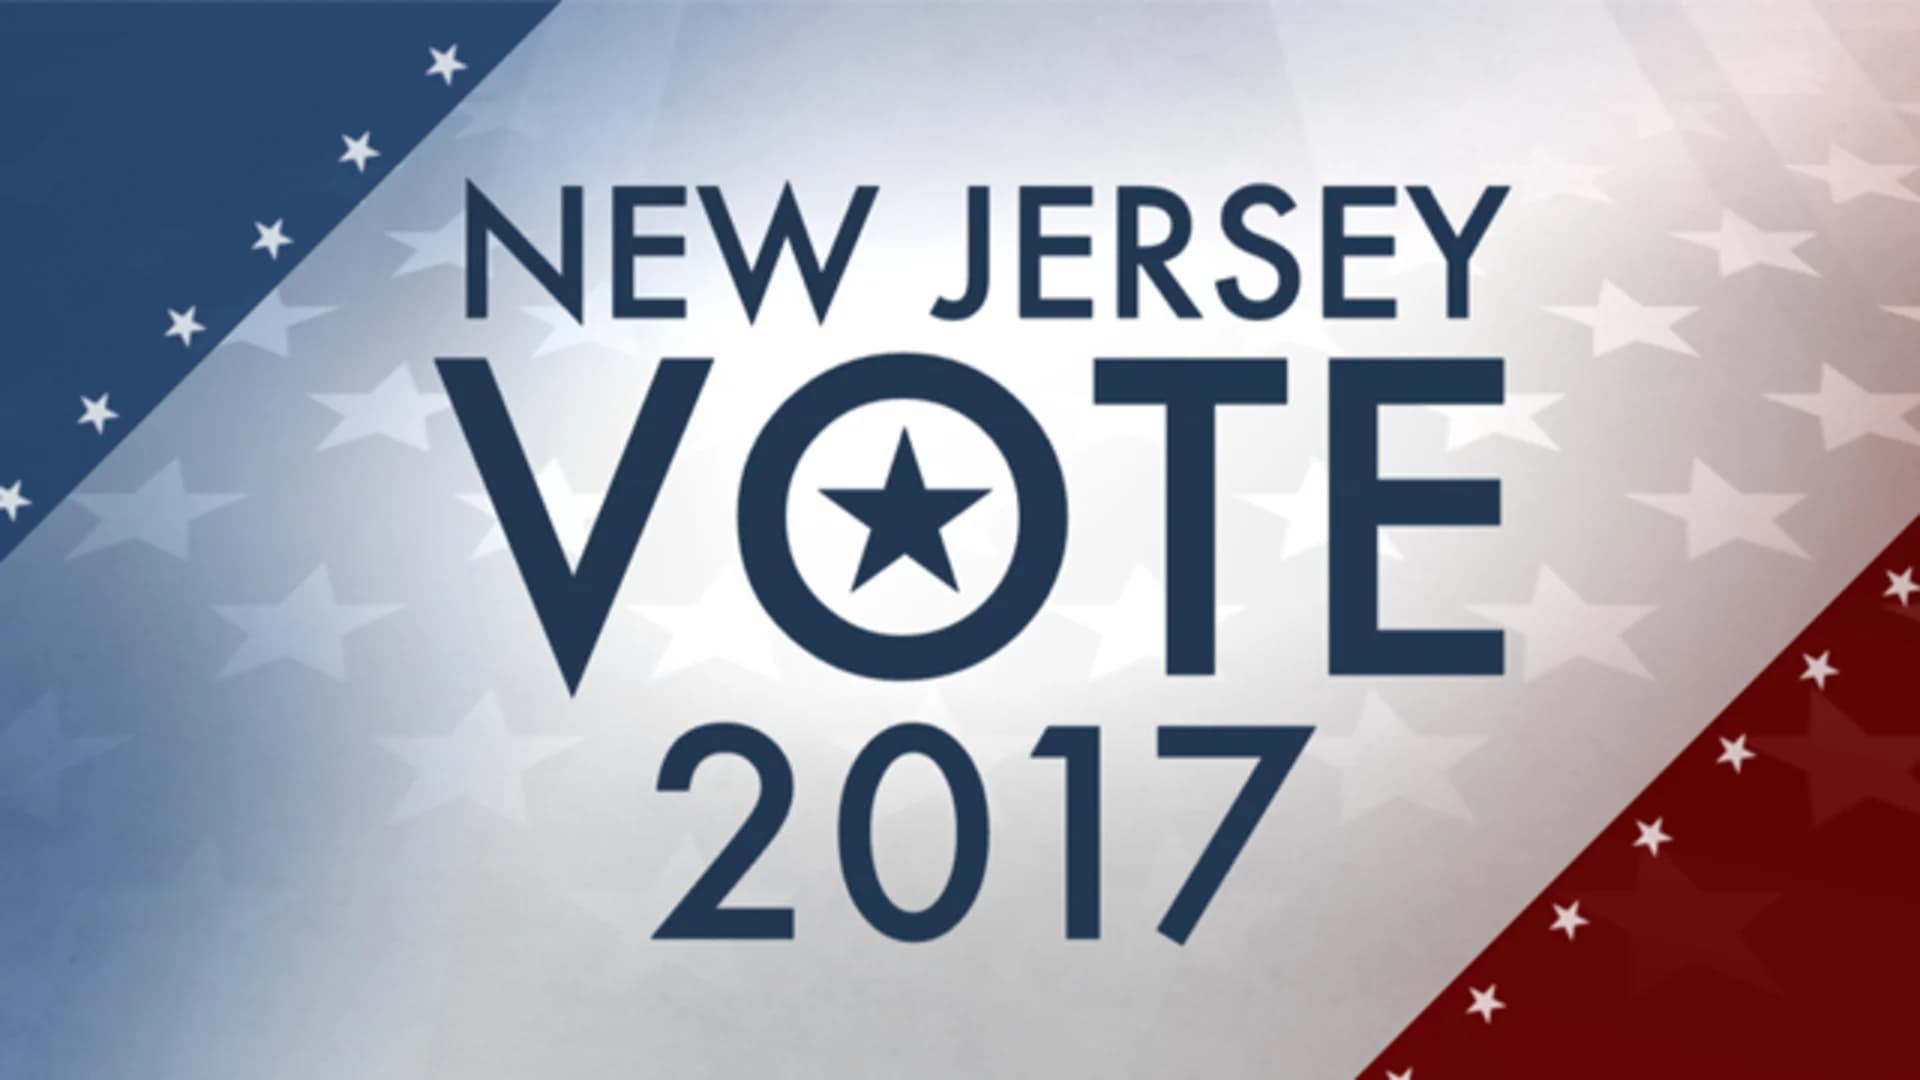 New Jersey Vote 2017: Complete Results and Coverage